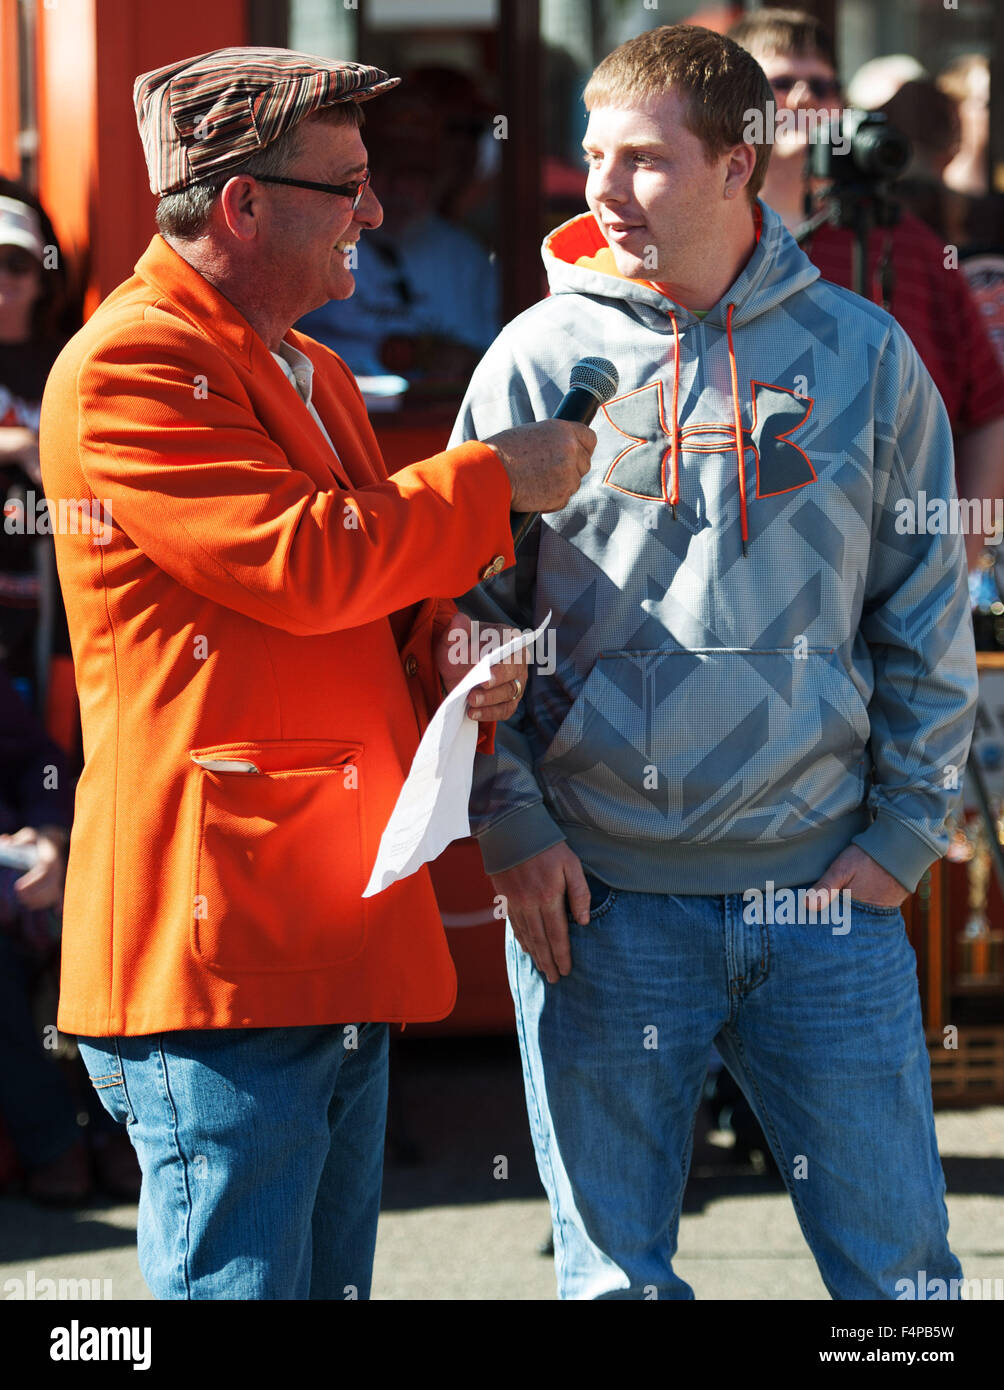 Circleville, Ohio, USA. 21st Oct, 2015. Rusty Ortman being interviewed by Ernie Weaver at the 109th Annual Circleville Pumpkin Show in Circleville, Ohio. Credit:  Brent Clark/Alamy Live News Stock Photo